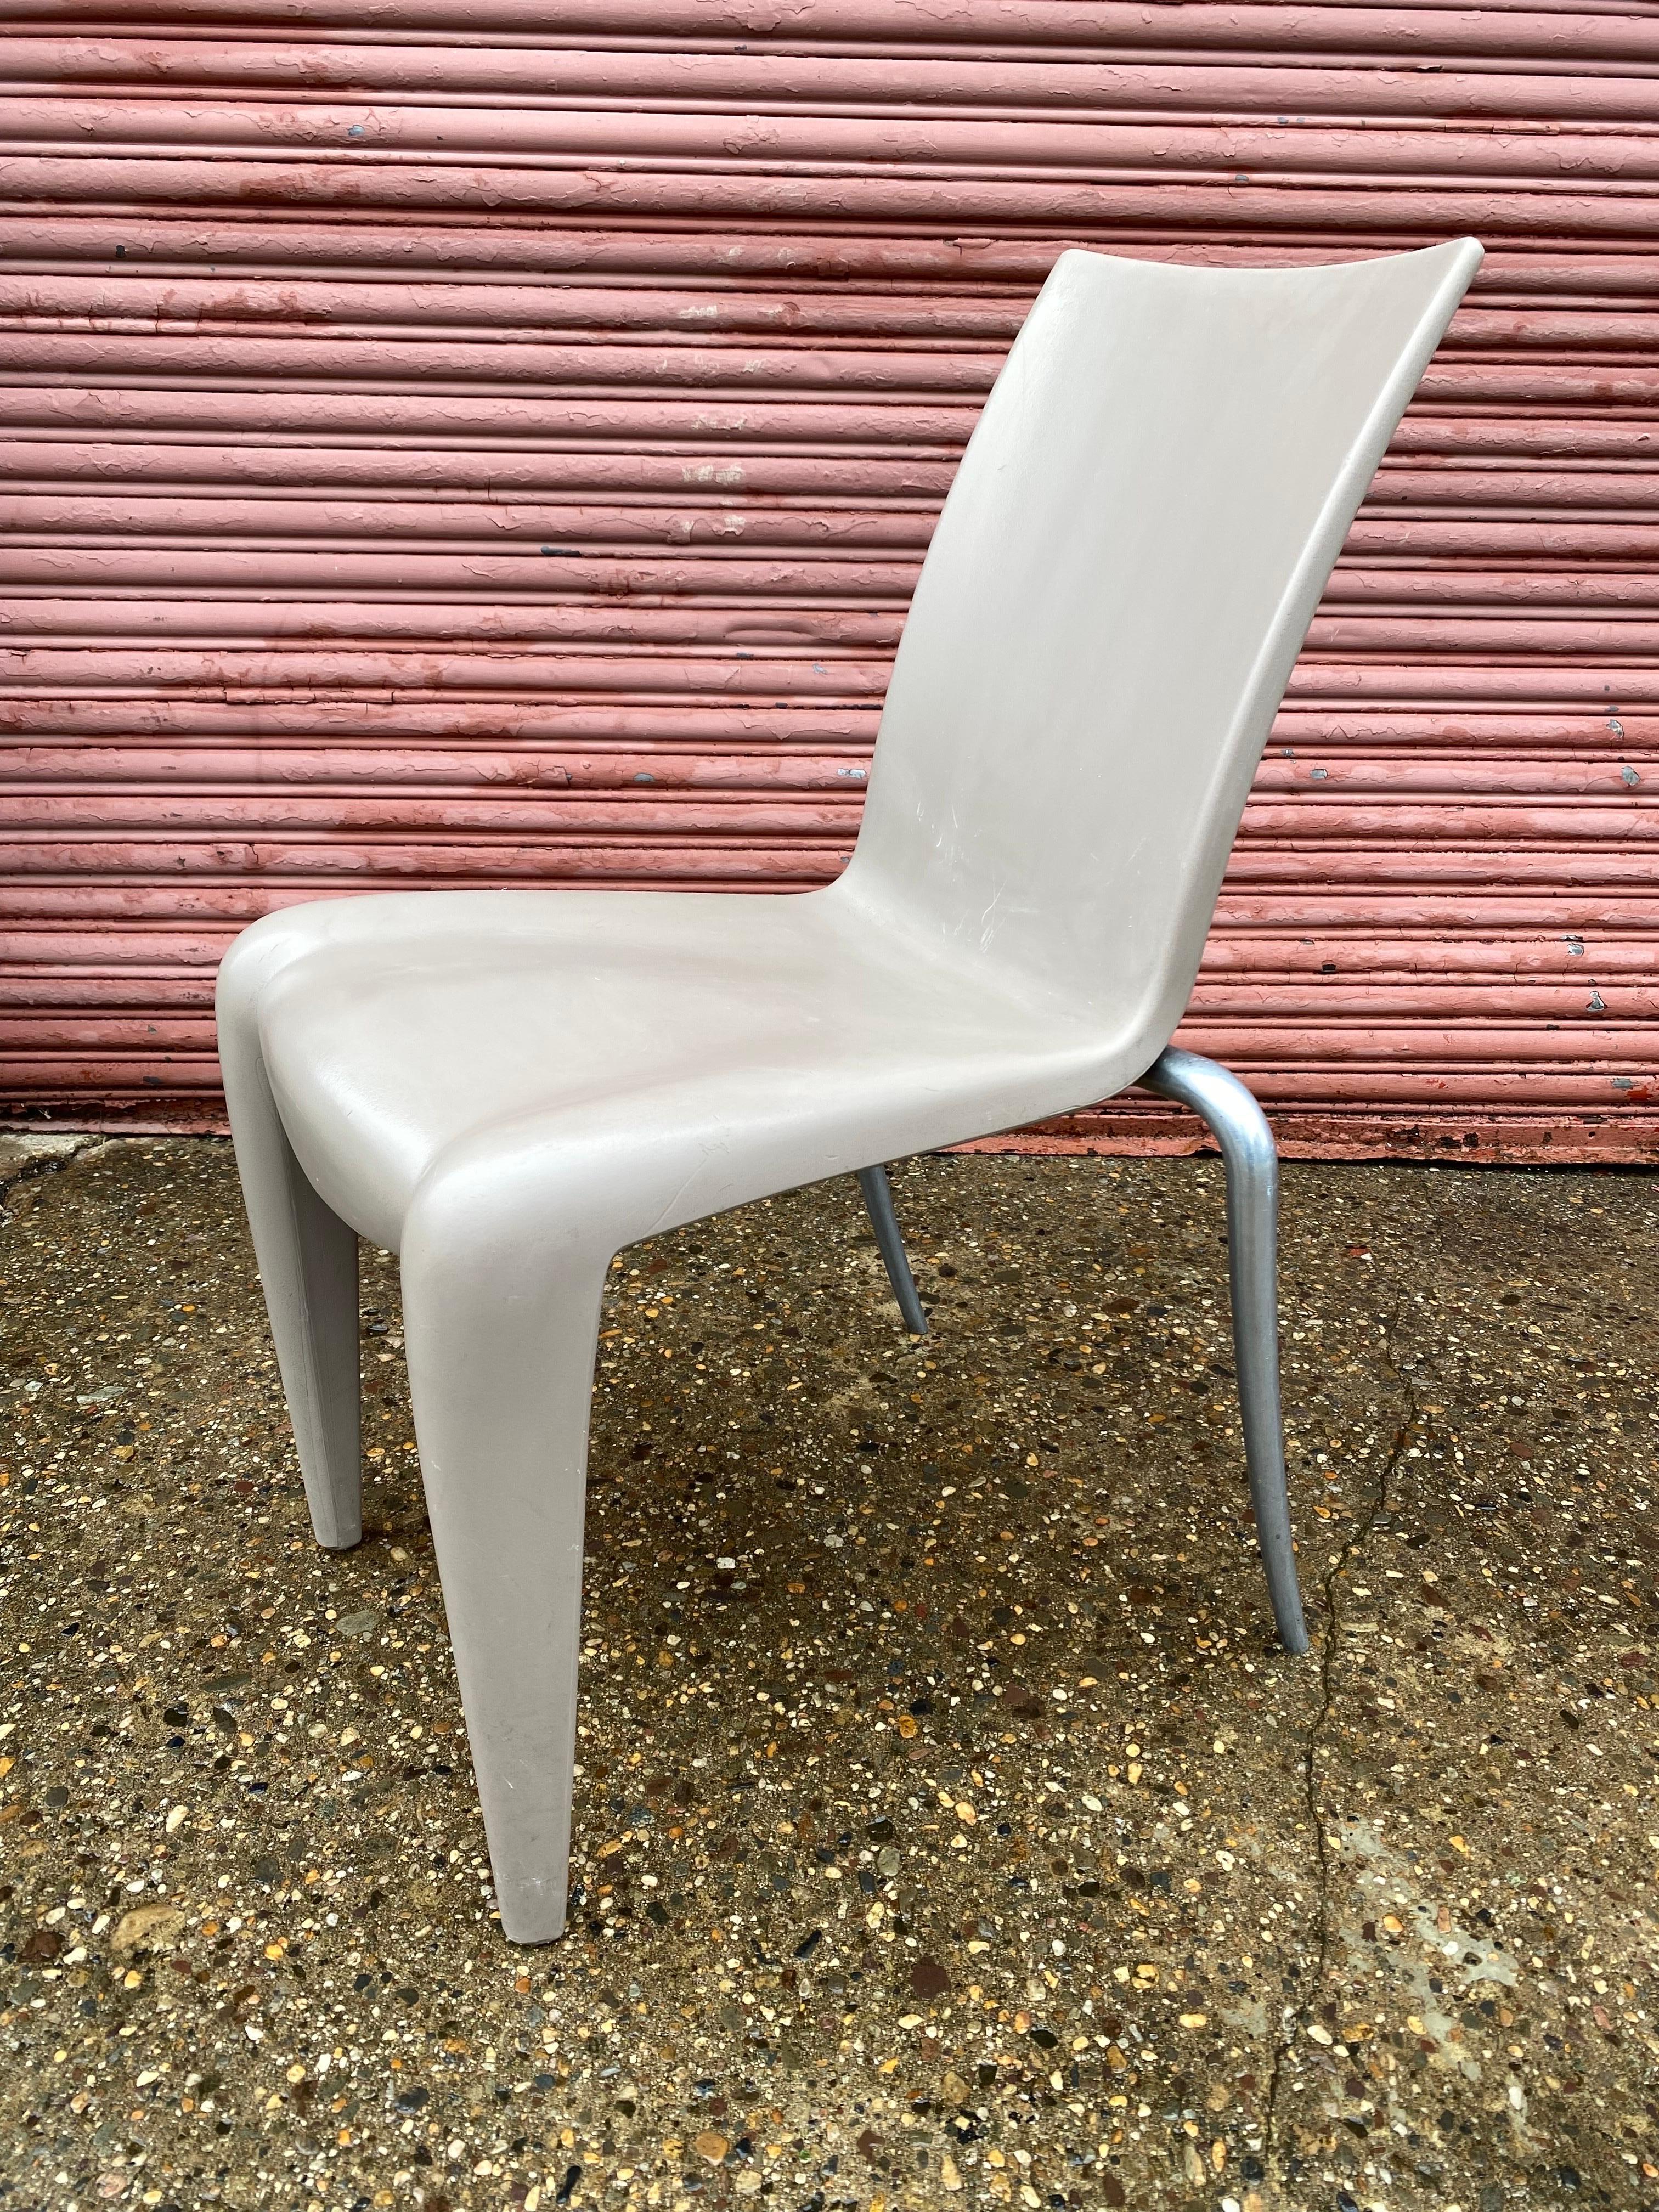 Philippe Starck for Vitra Louis 20 Stacking Chairs!  18 AVAILABLE, priced separately!  Aluminum back legs with a molded plastic back, seat and front legs.  Chairs sit quite nice and stack when you don't have the room!  Buy 1 or 18!